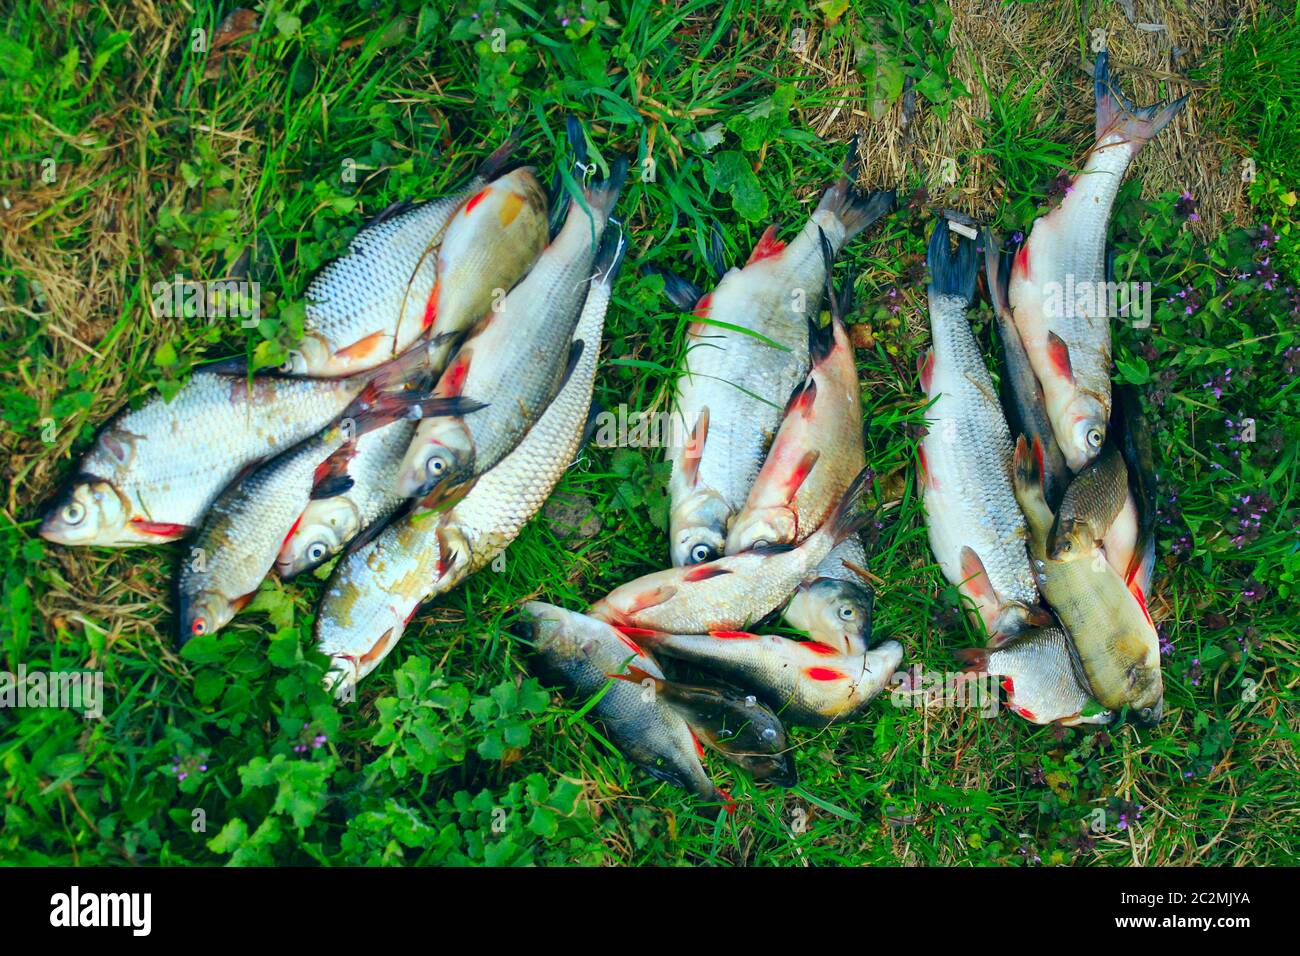 Caught fishes perches common nases breames and crucian on the grass. Stock Photo